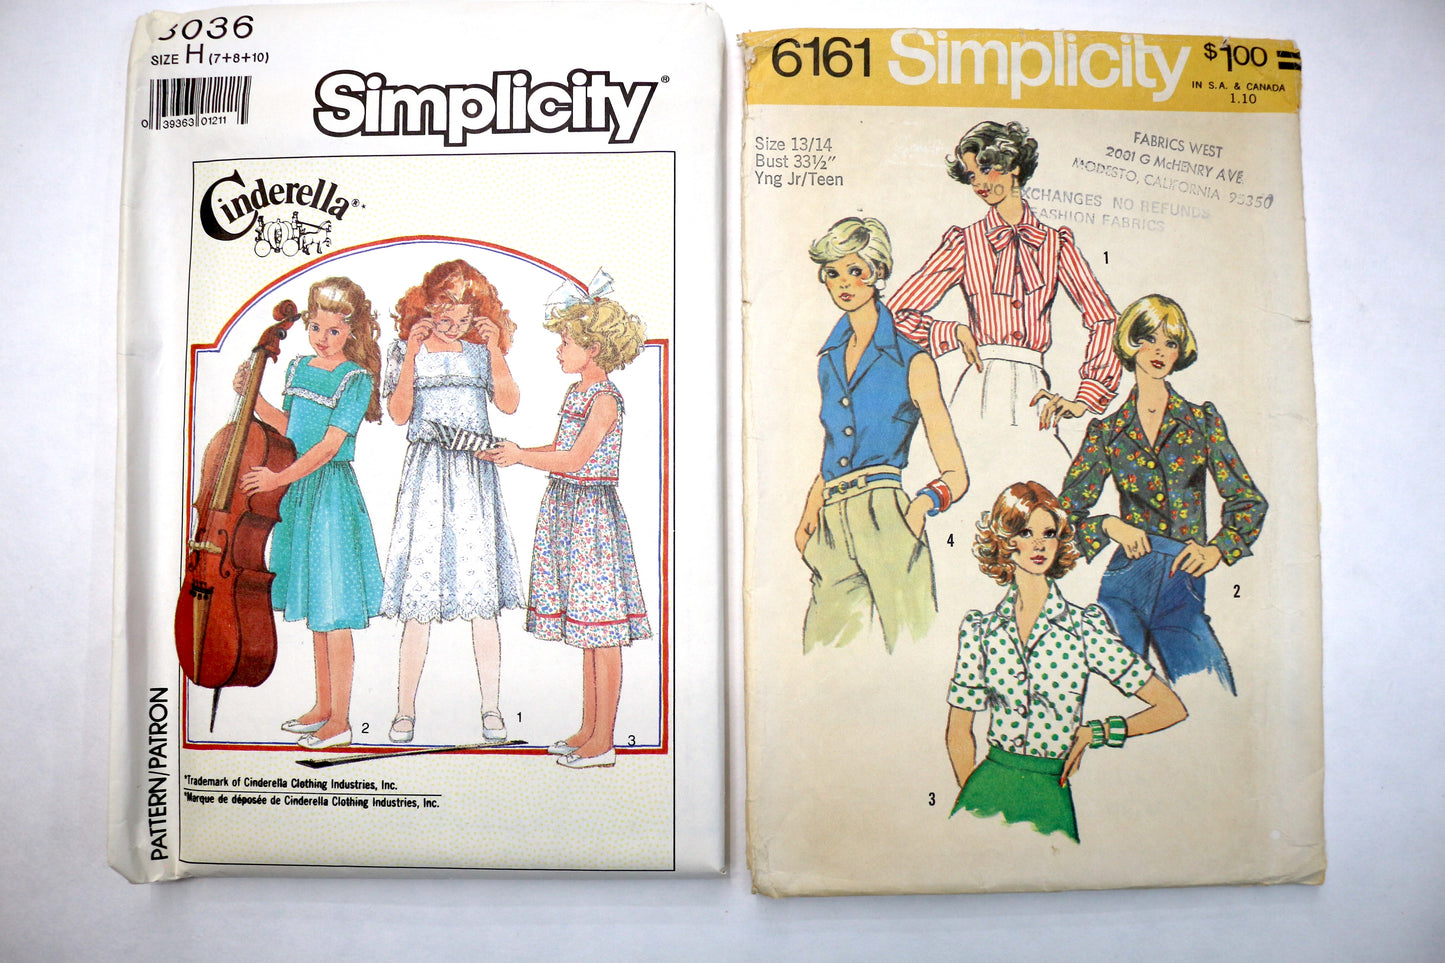 Simplicity 3036 Sewing Pattern or Simplicity 6161 Sewing Pattern